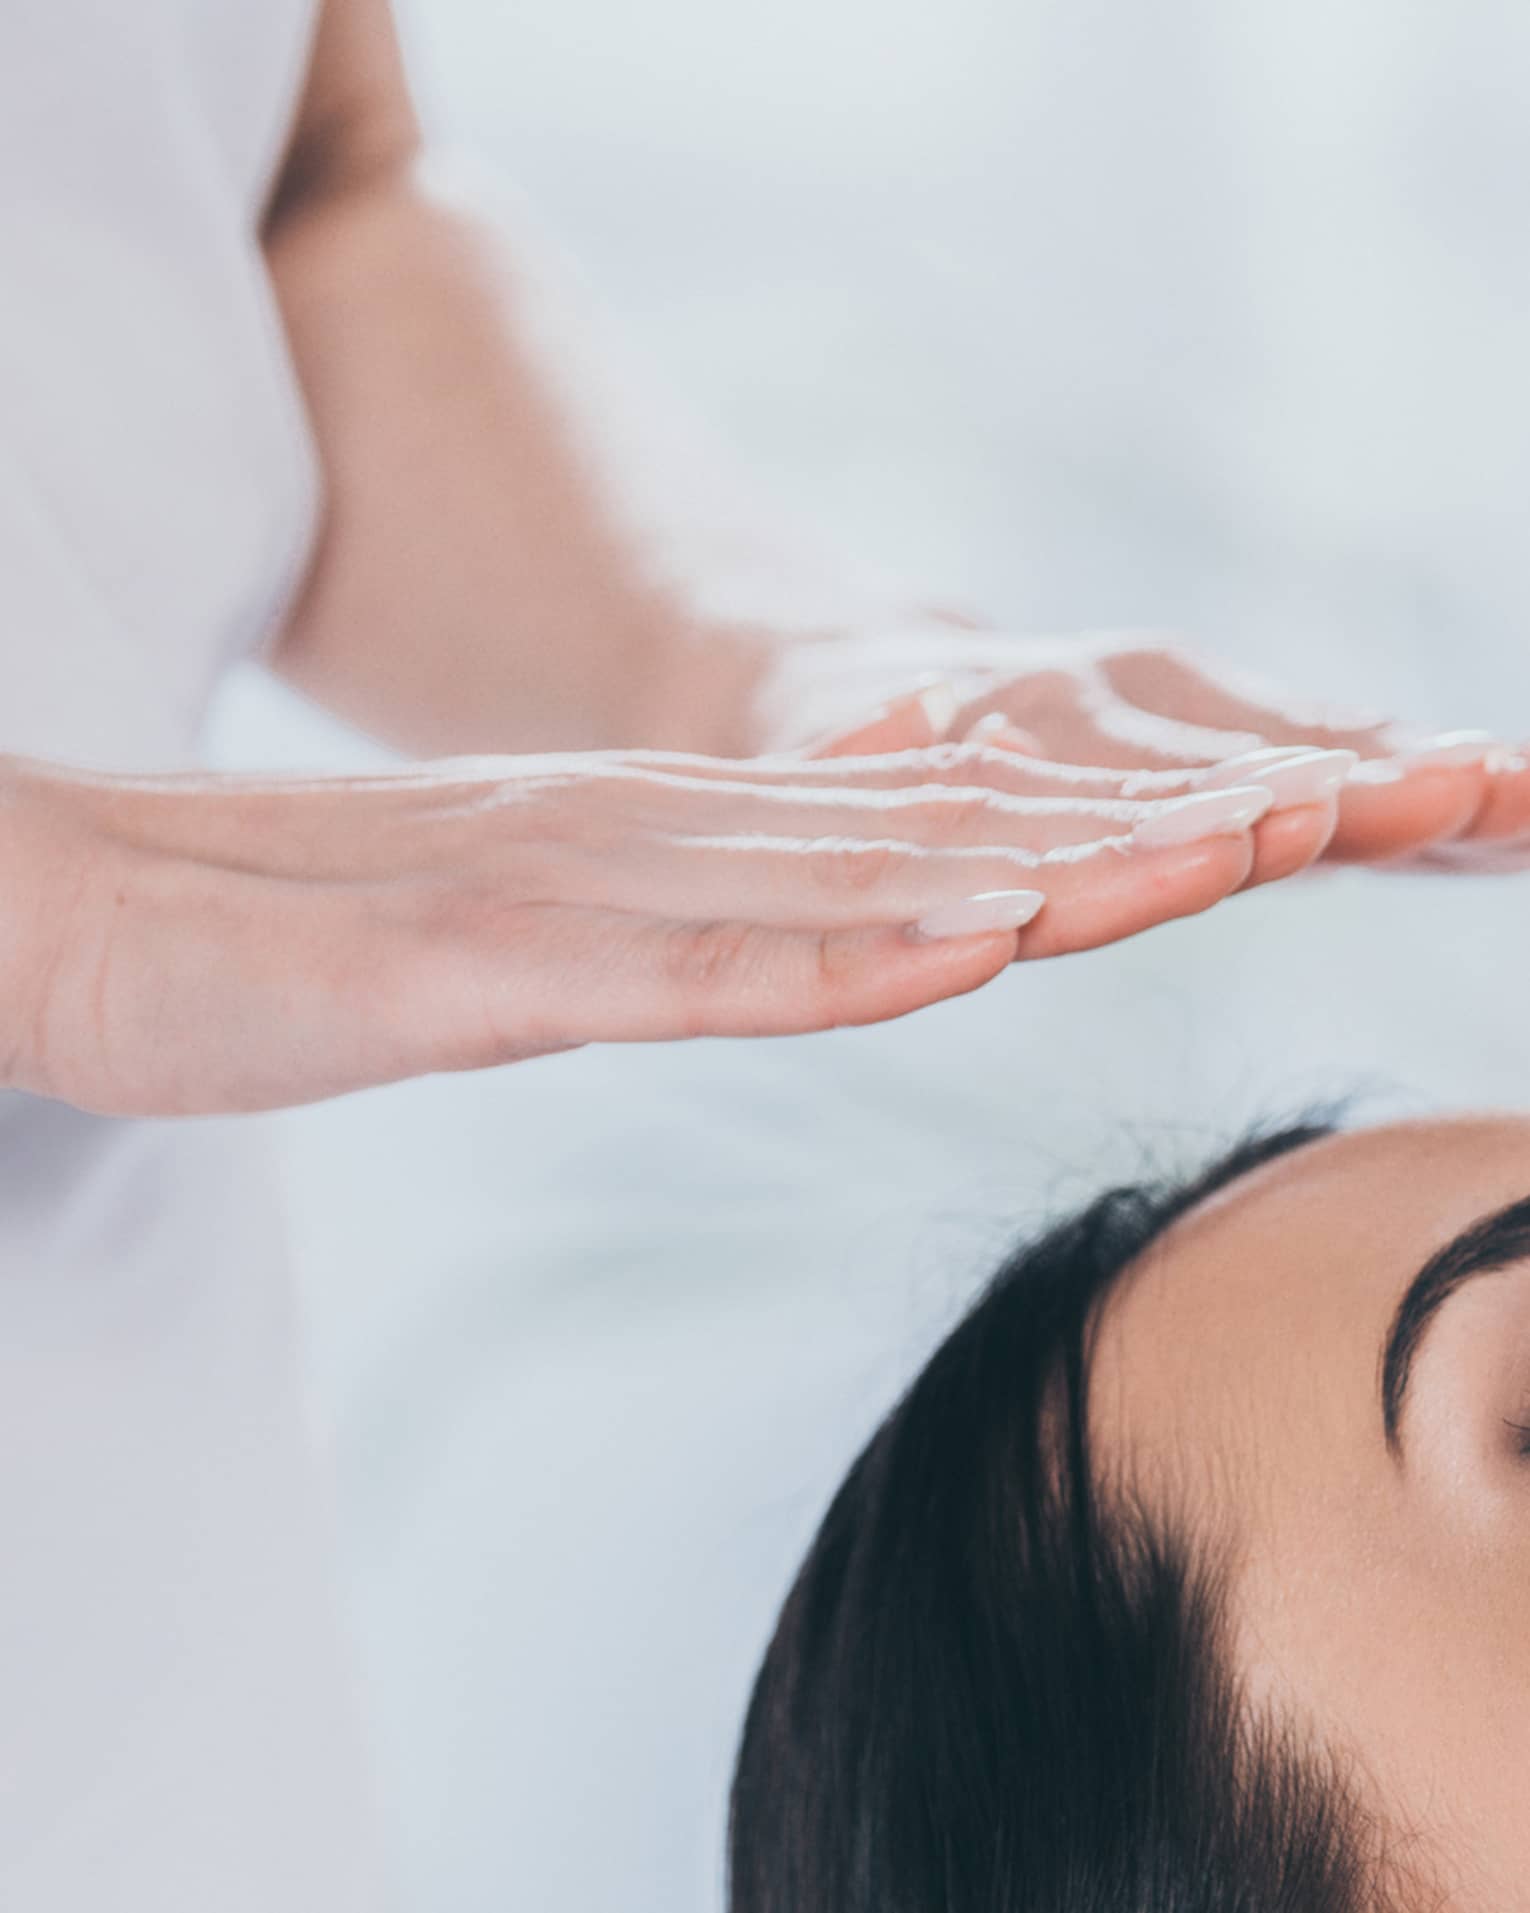 Woman with eyes closed lays on rolled up towel on spa table under therapists' hovering hands